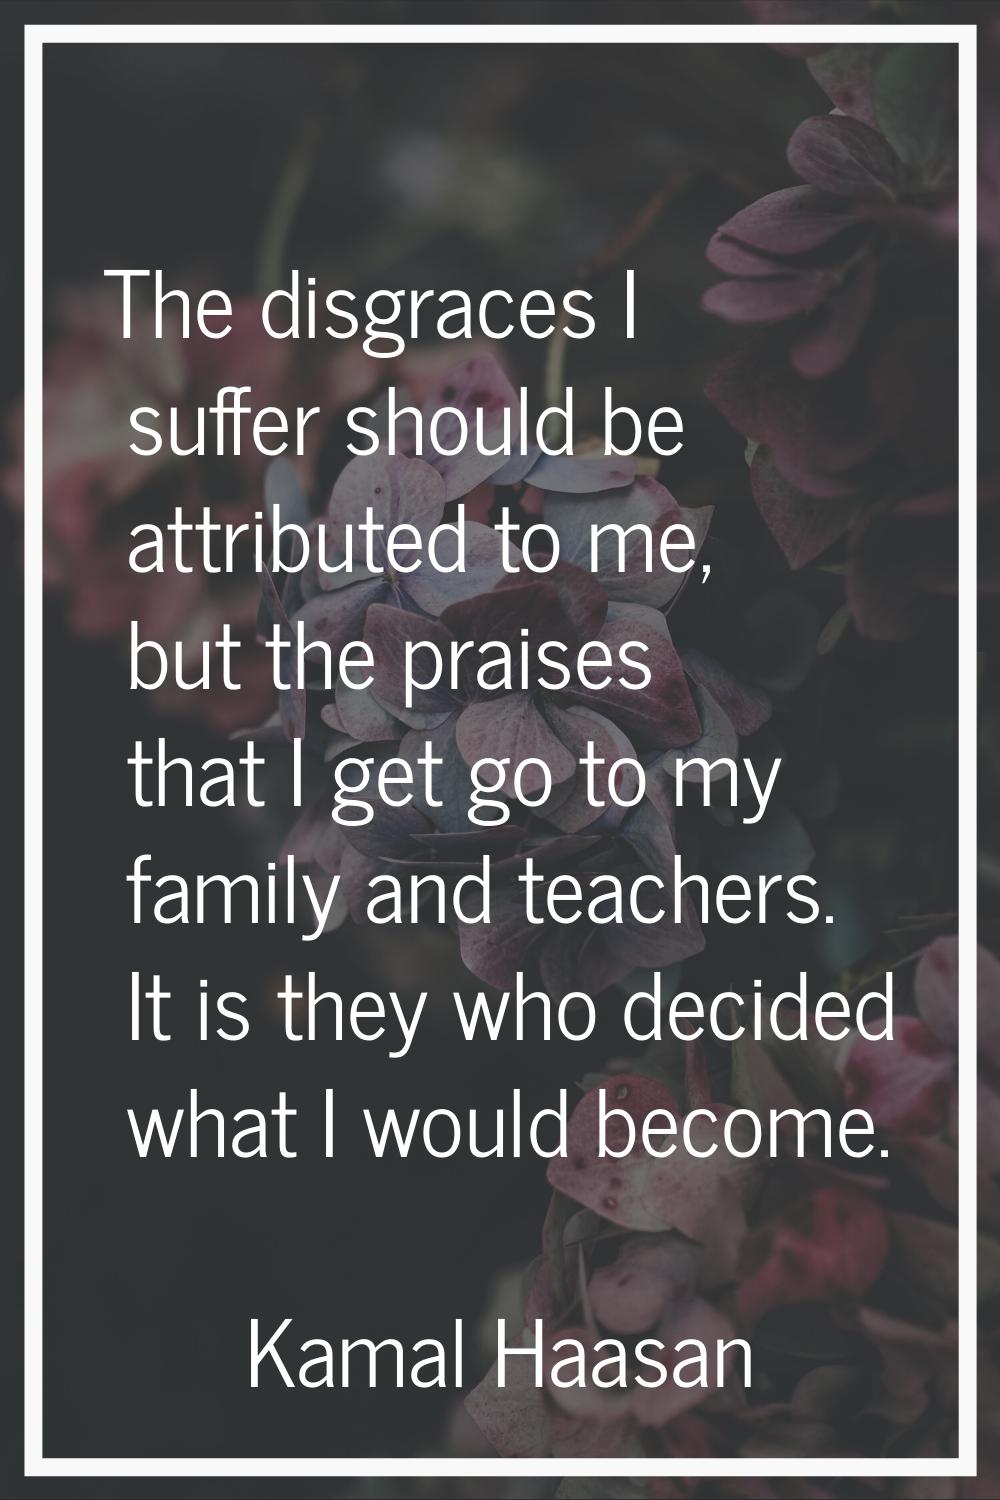 The disgraces I suffer should be attributed to me, but the praises that I get go to my family and t